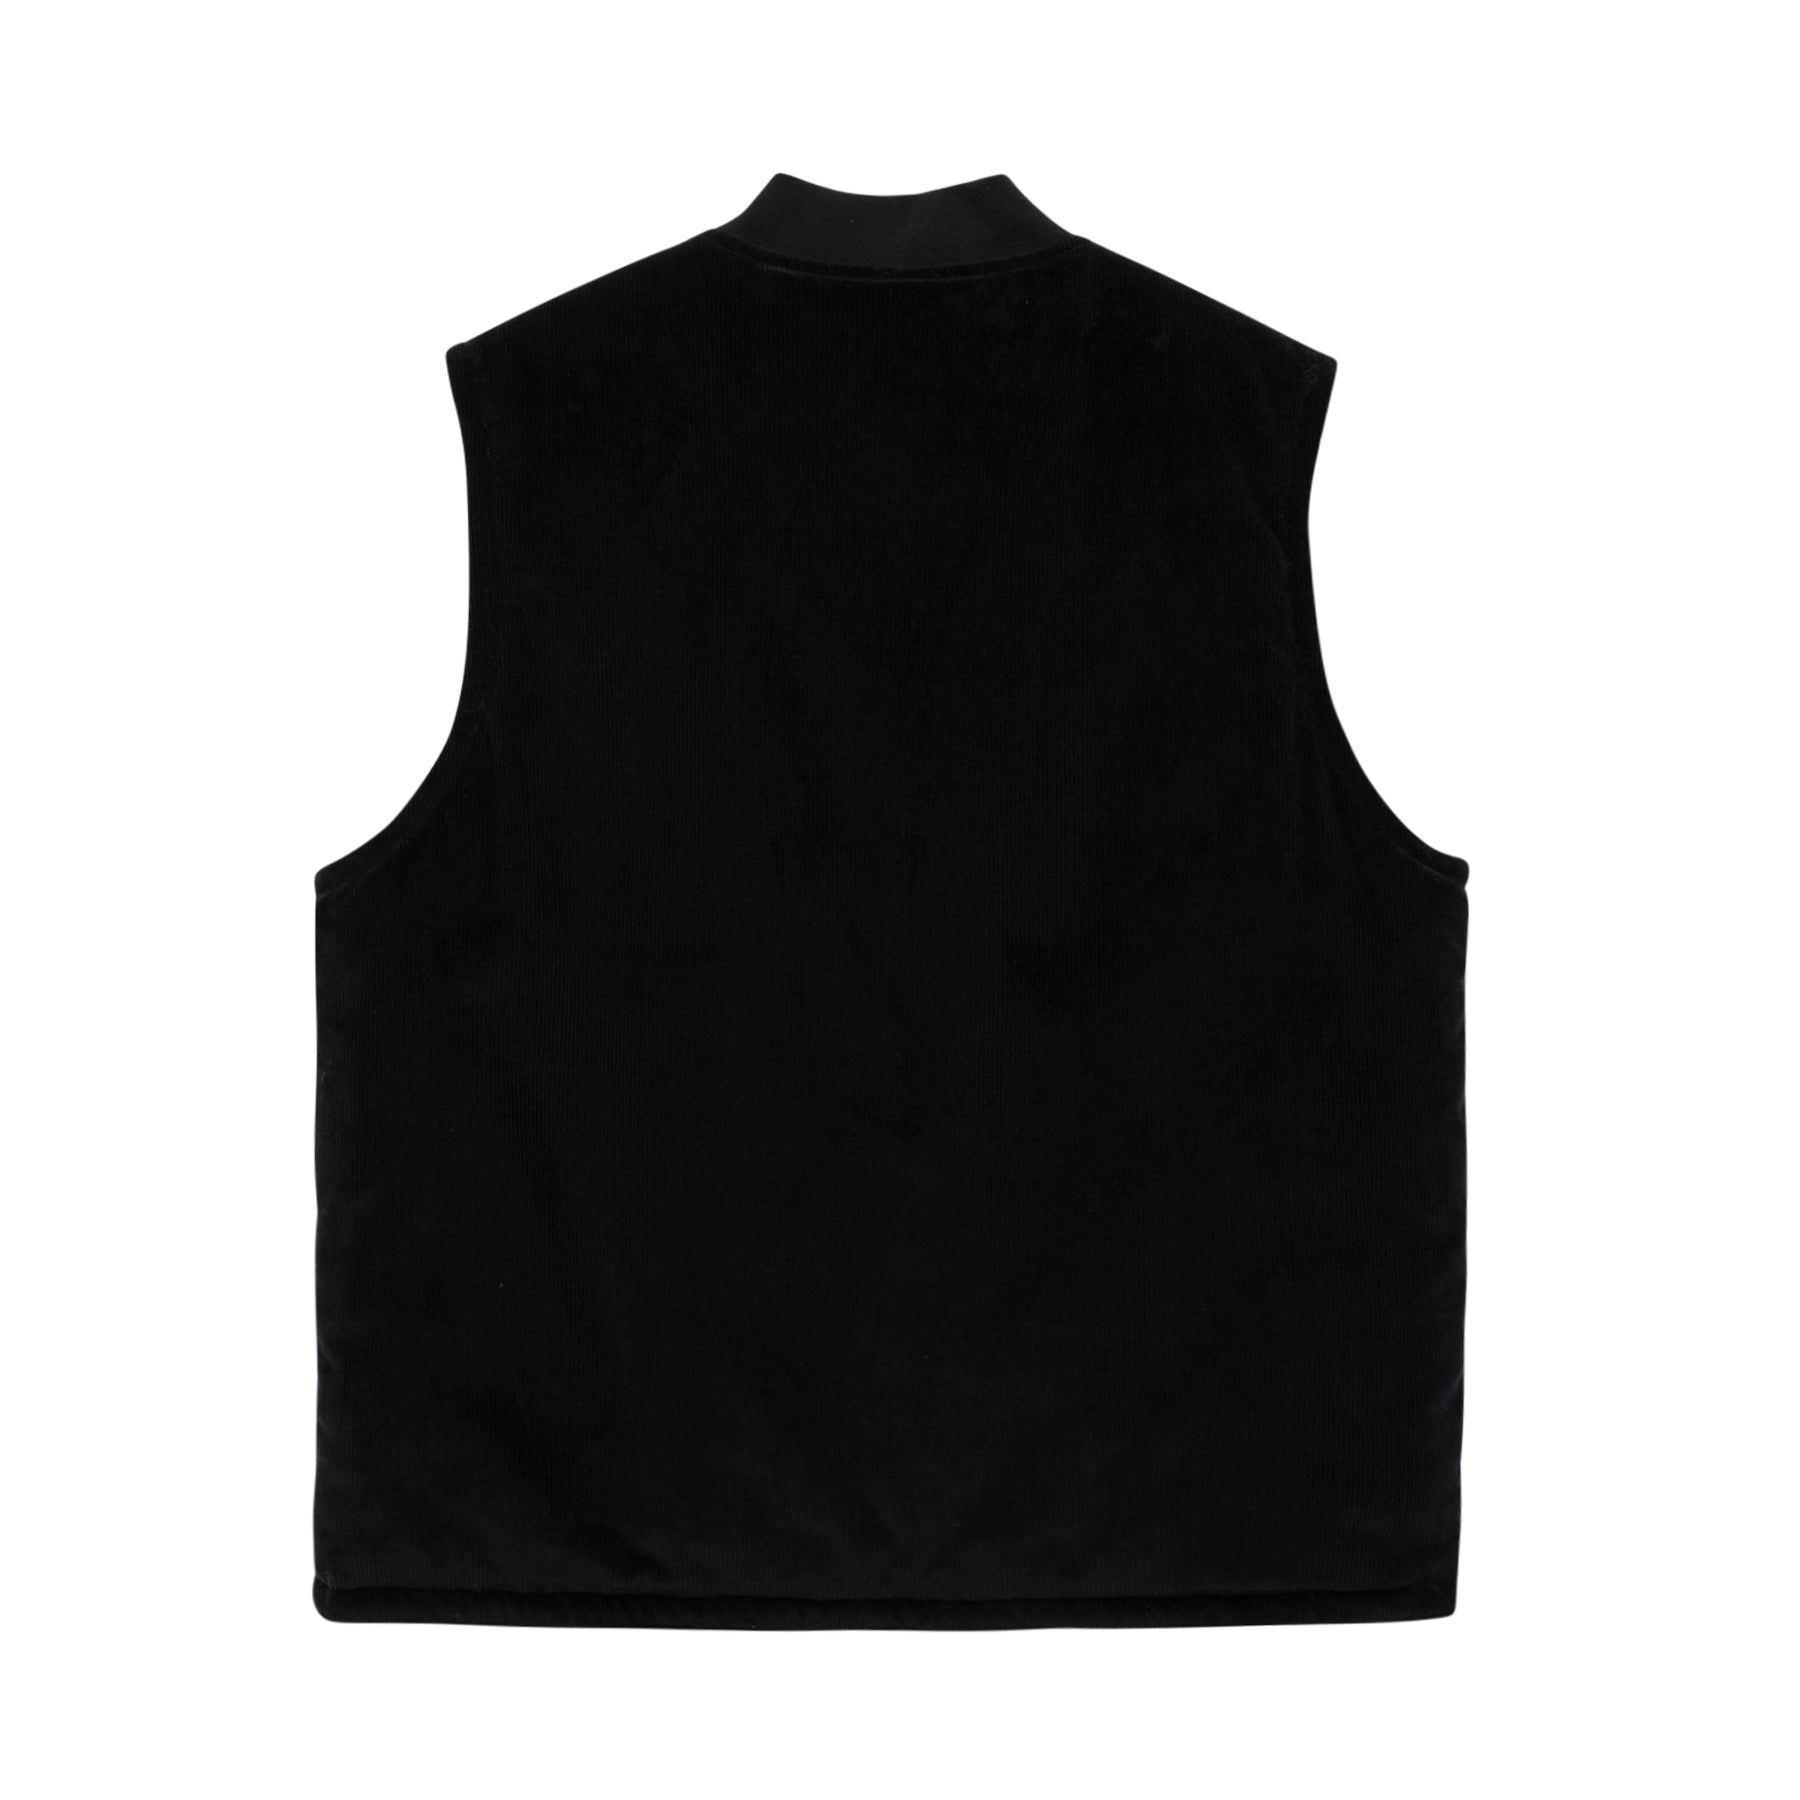 TRIBUTE REVERSIBLE VEST by GOLF WANG